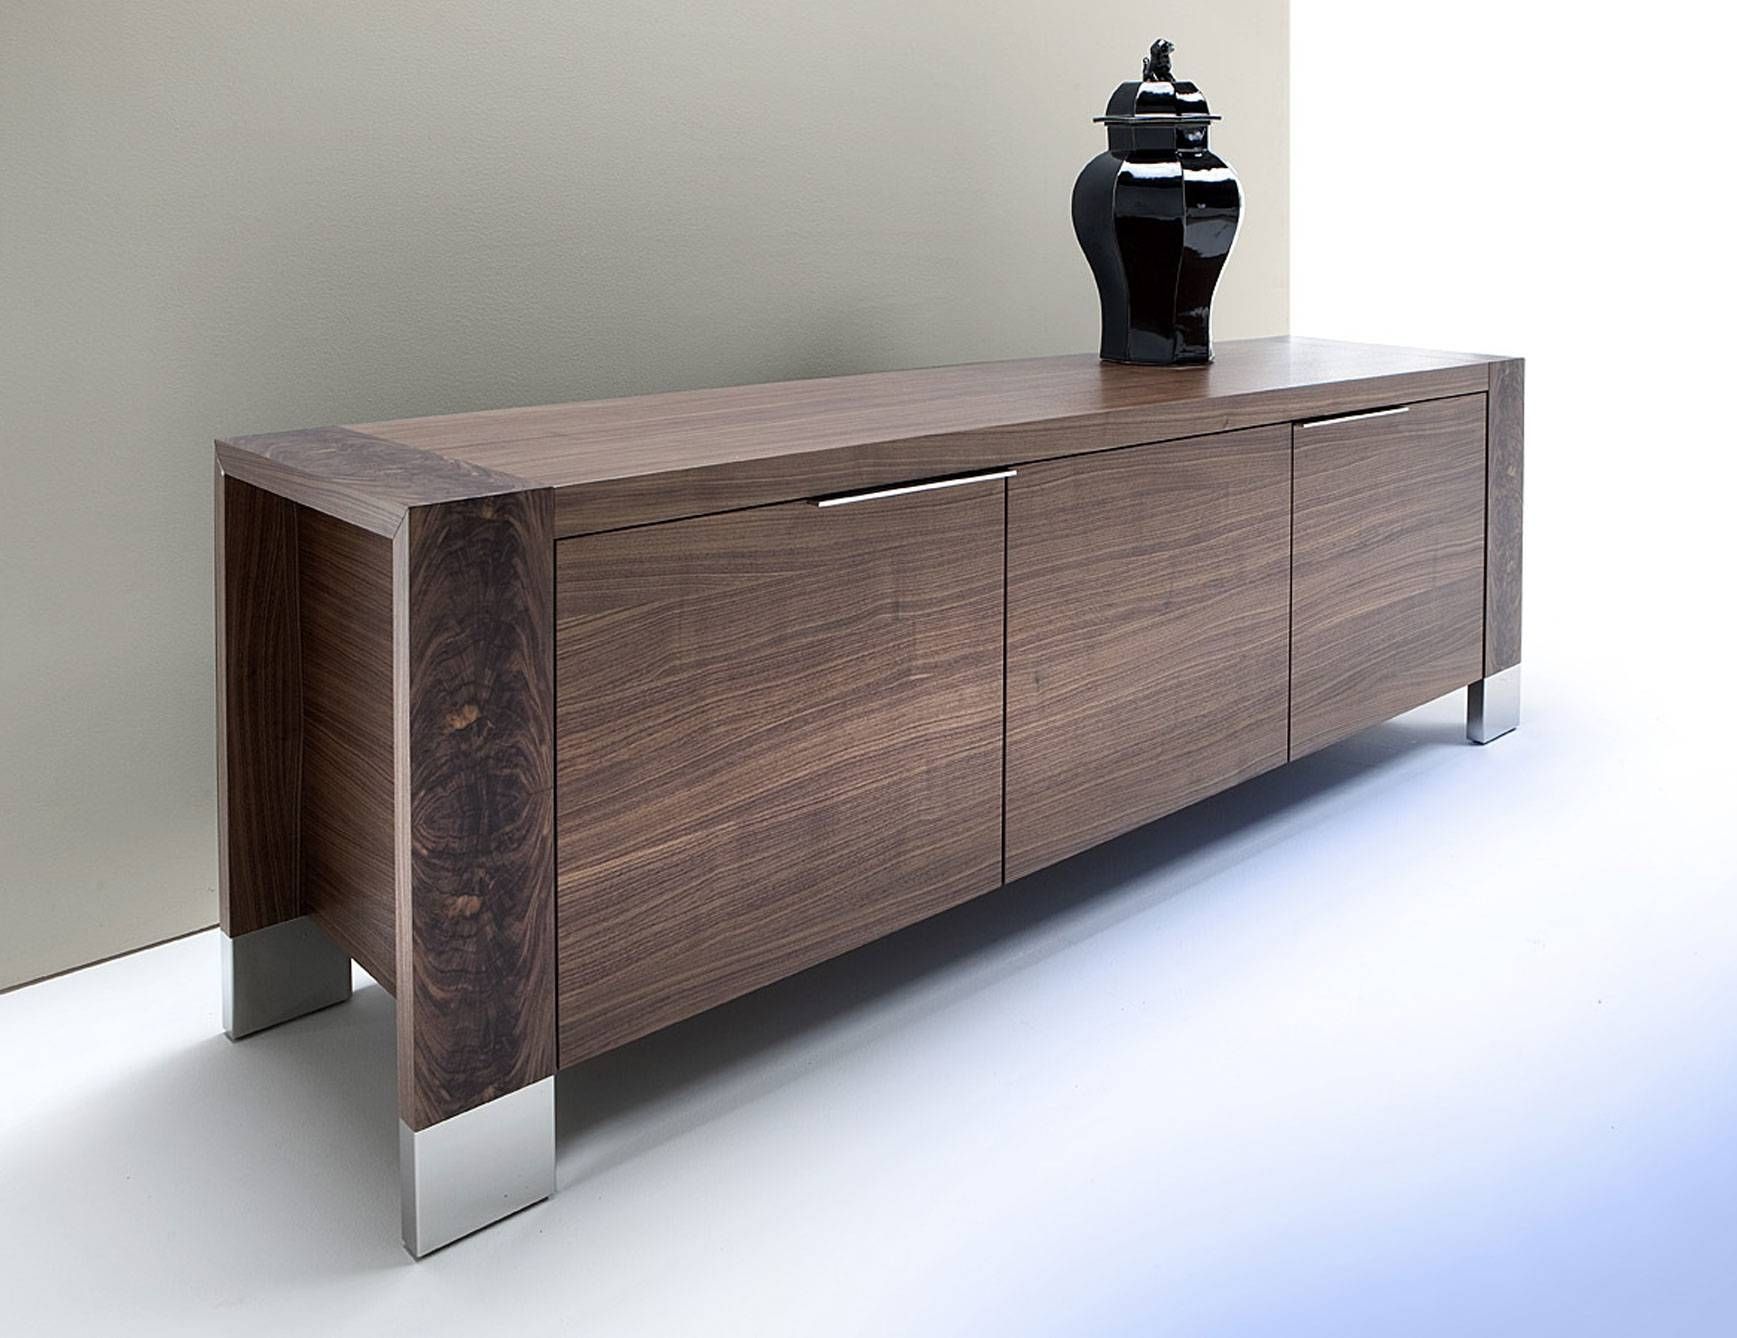 Sideboards. Amusing Buffet Storage Credenza: Buffet Storage Within Most Recently Released Credenza Sideboards (Photo 7 of 15)